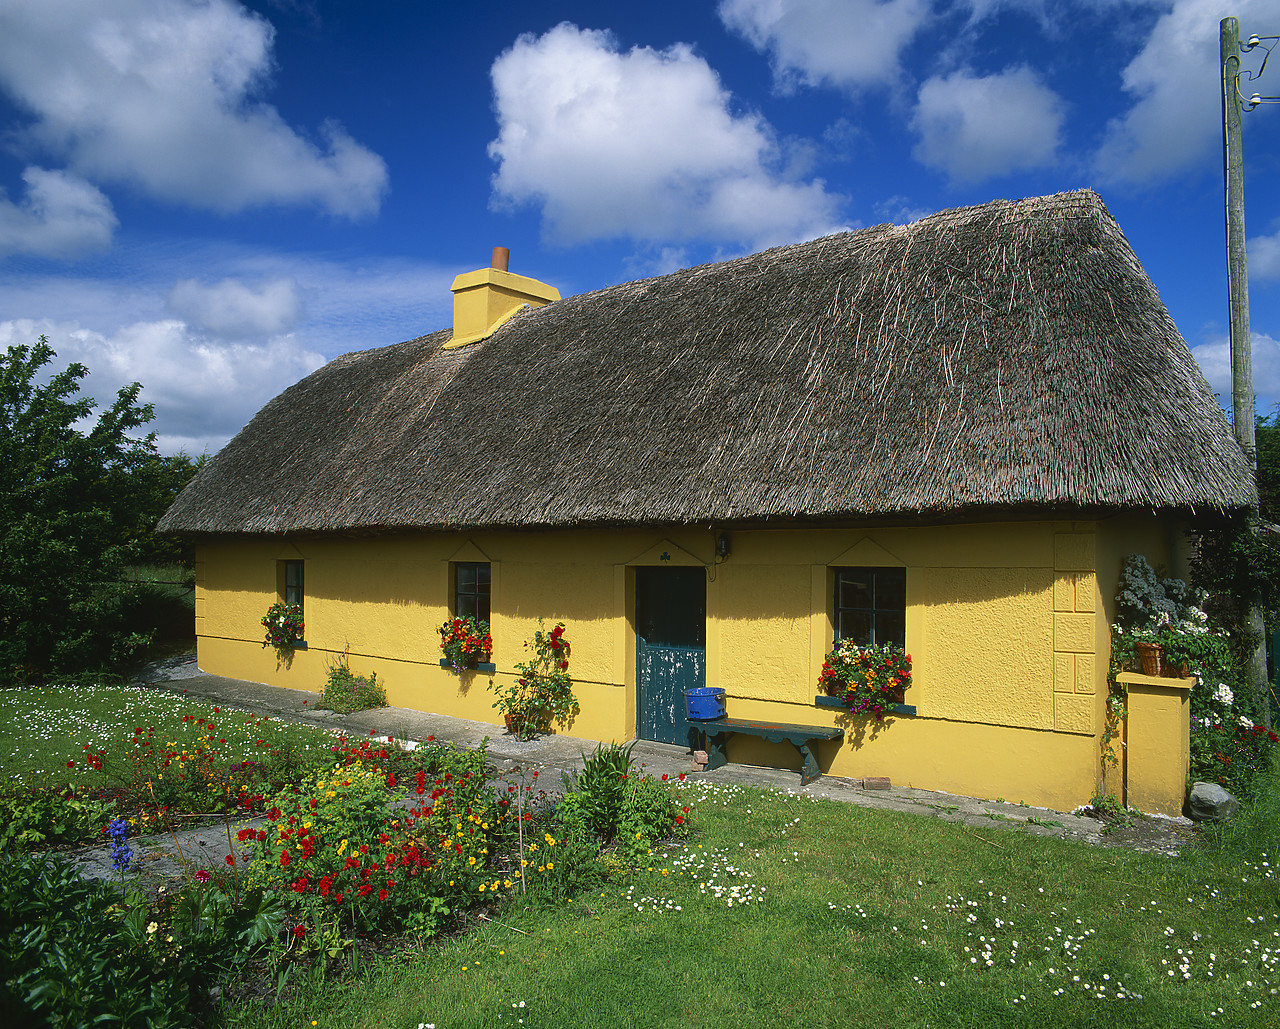 #990273-1 - Thatched Cottage, near Listowel, Co. Kerry, Ireland